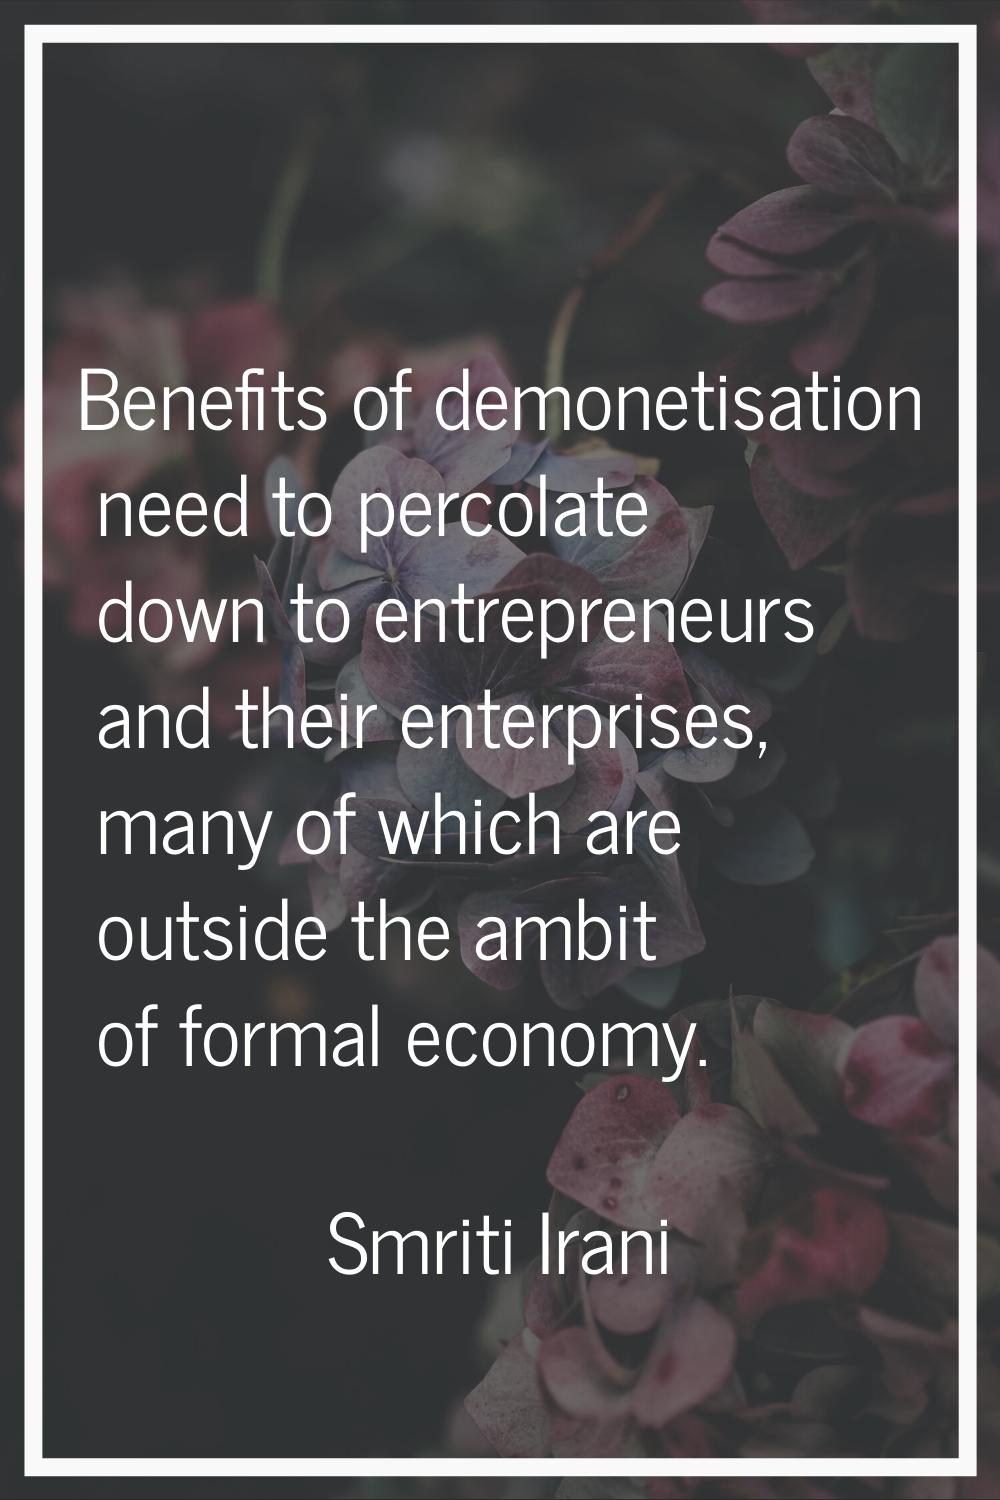 Benefits of demonetisation need to percolate down to entrepreneurs and their enterprises, many of w